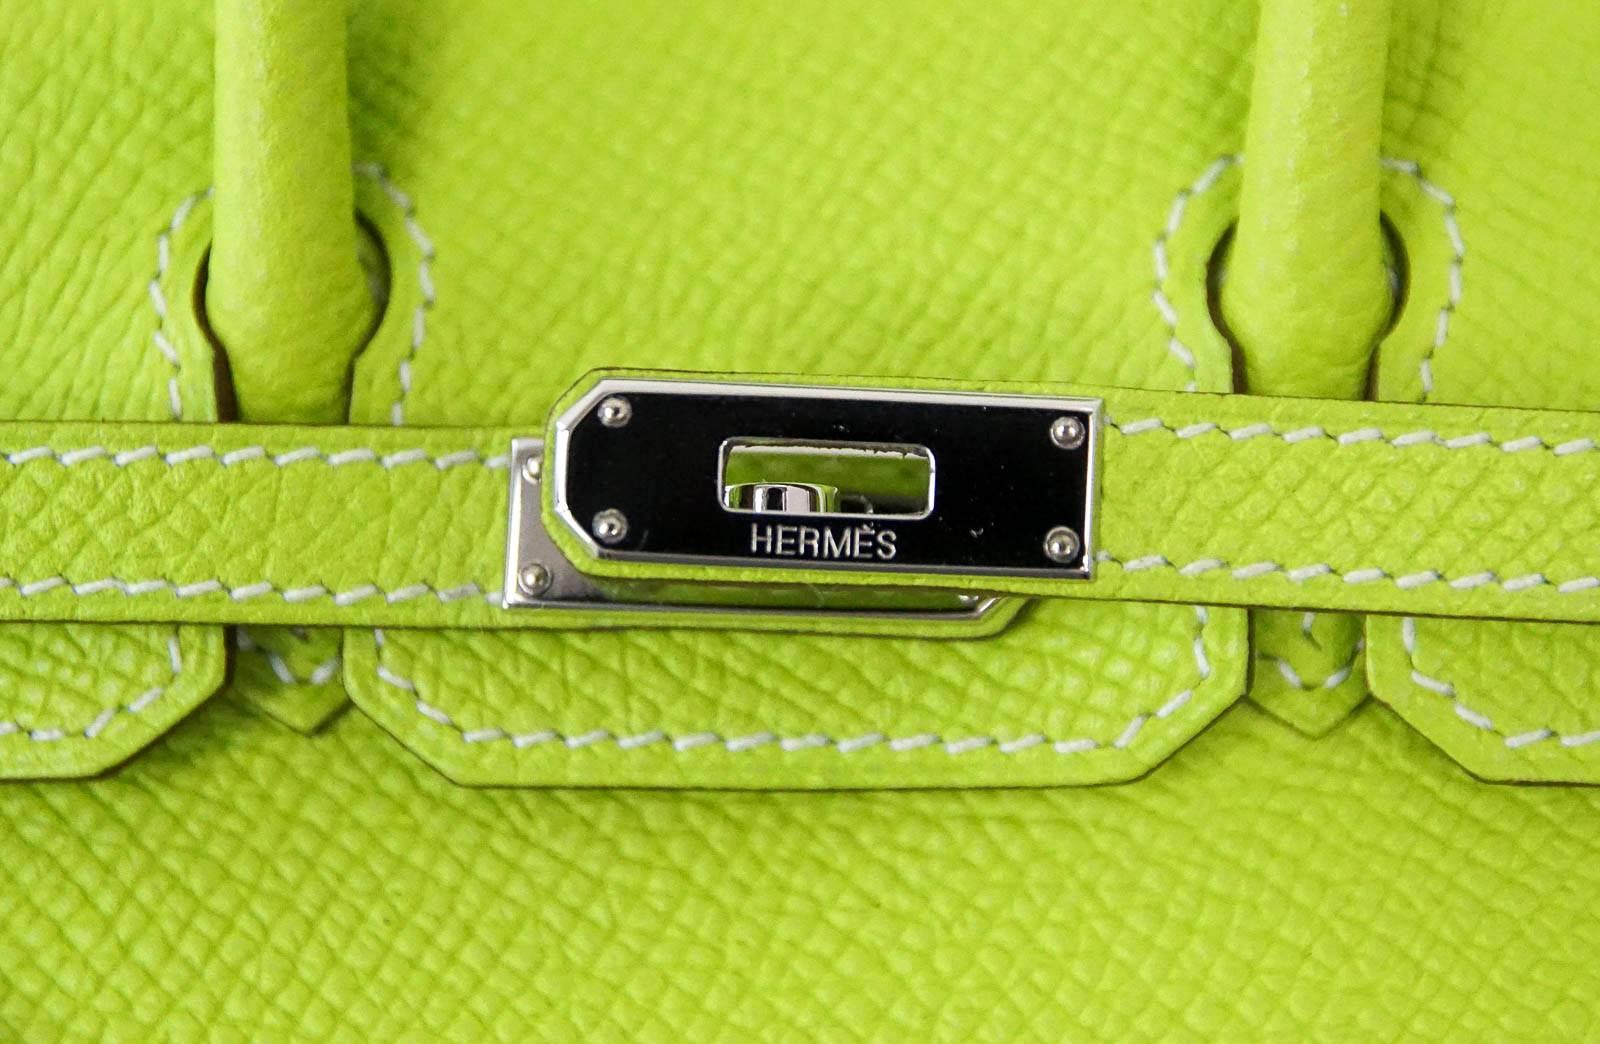 Guaranteed authentic rare Hermes Tiny Miniature Birkin Limited Edition.
Fresh Kiwi Epsom leather with palladium hardware.
Worn as wristlet, shoulder bag, top handle or draped on on larger sized bag.
Comes with detachable shoulder strap, sleepers and